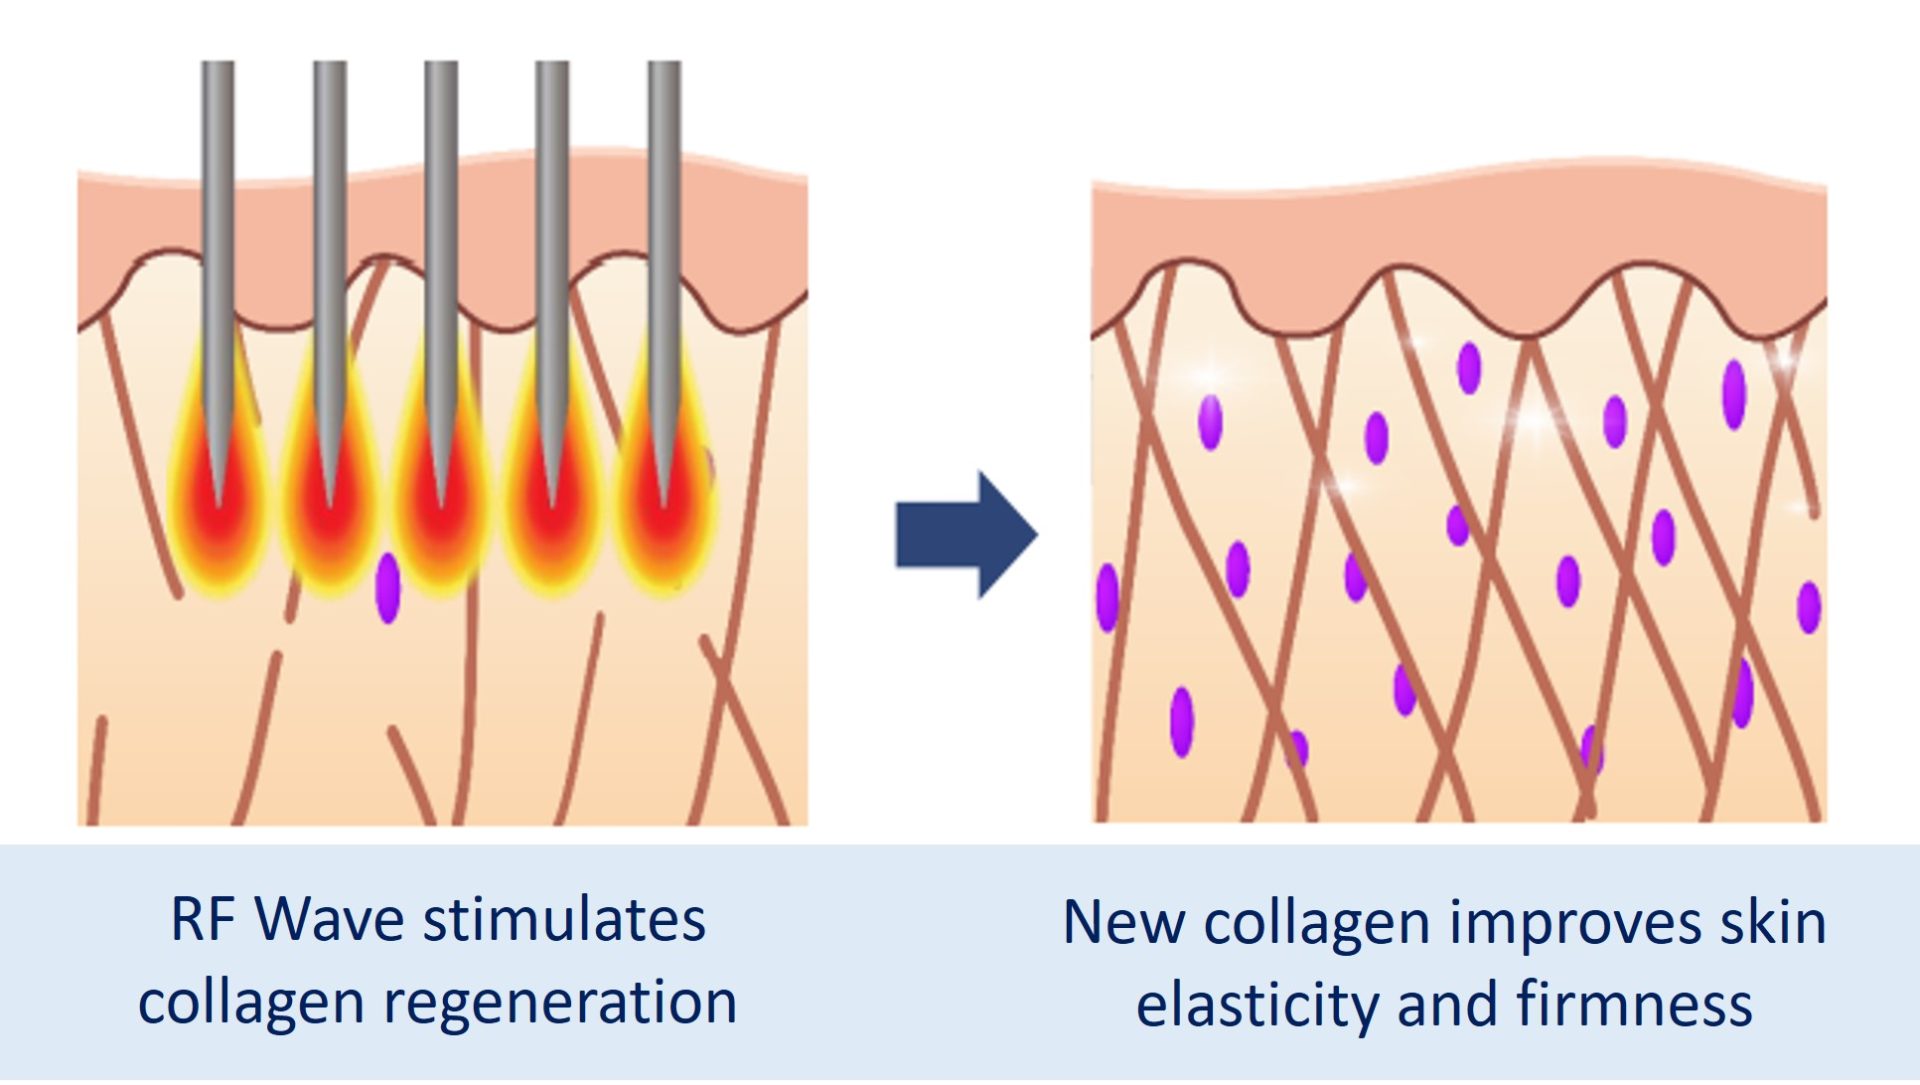 collagen renewal after sylfirm x treatment